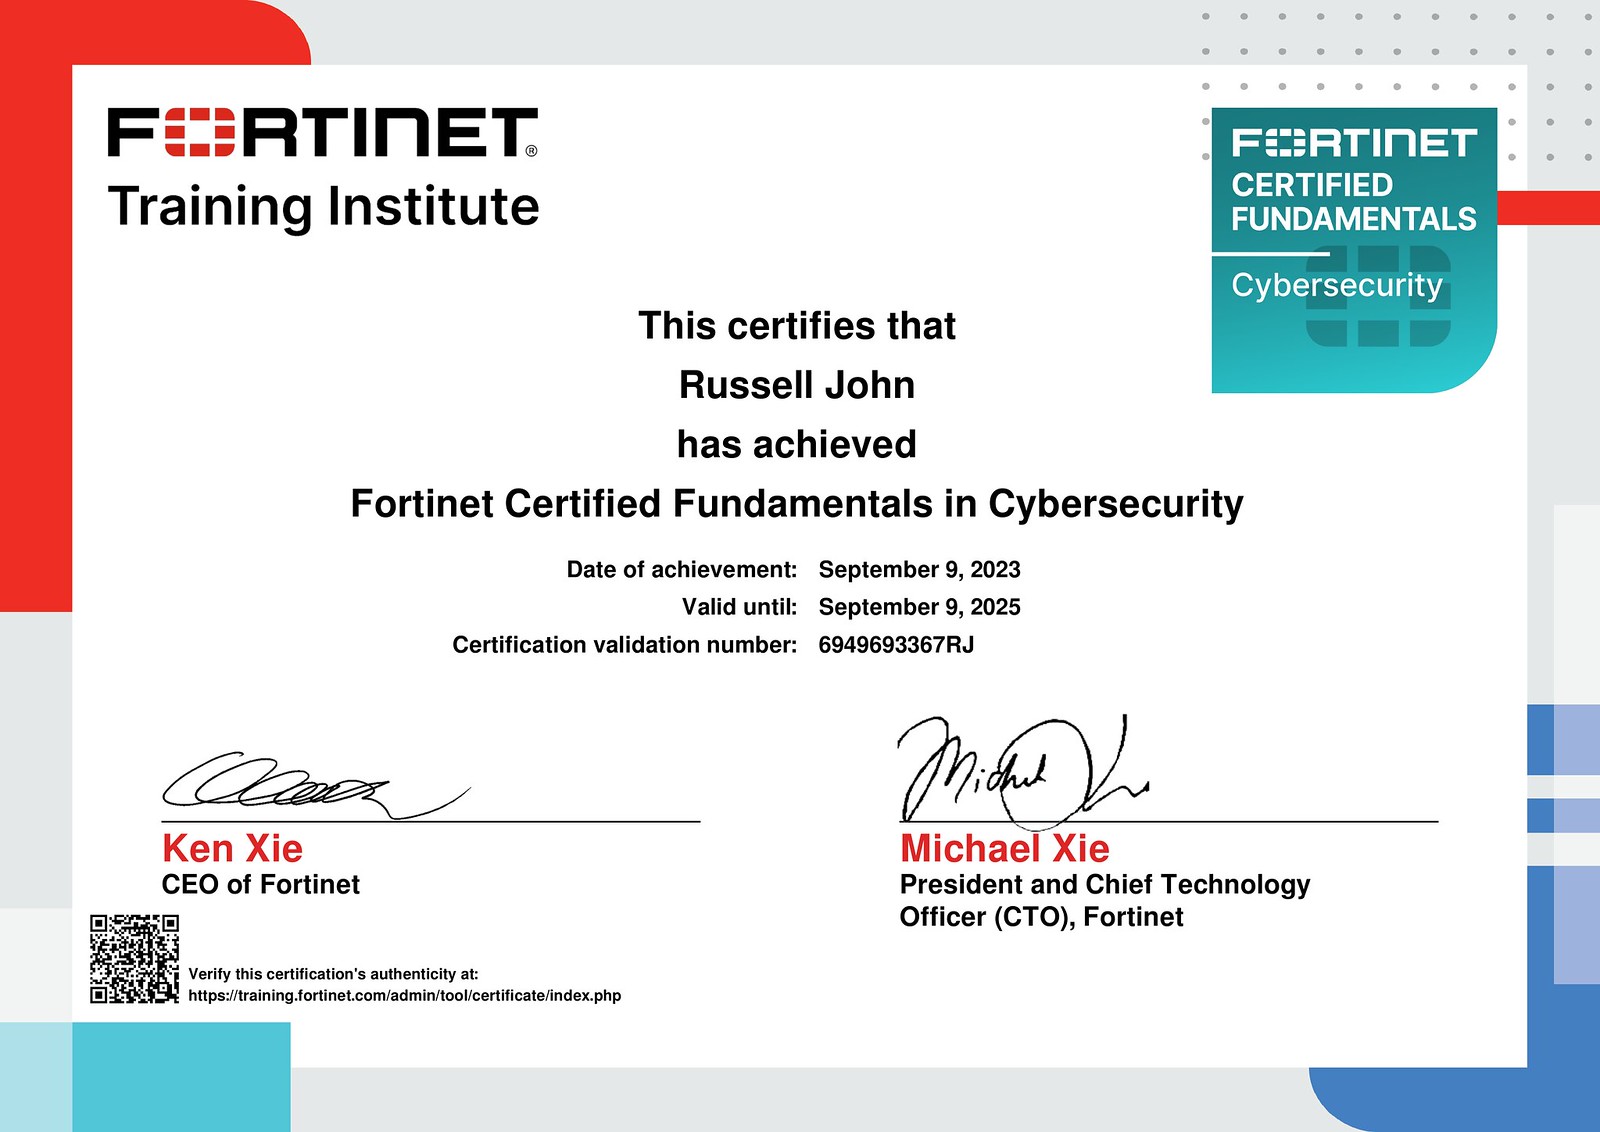 Fortinet Certified Fundamentals in Cybersecurity